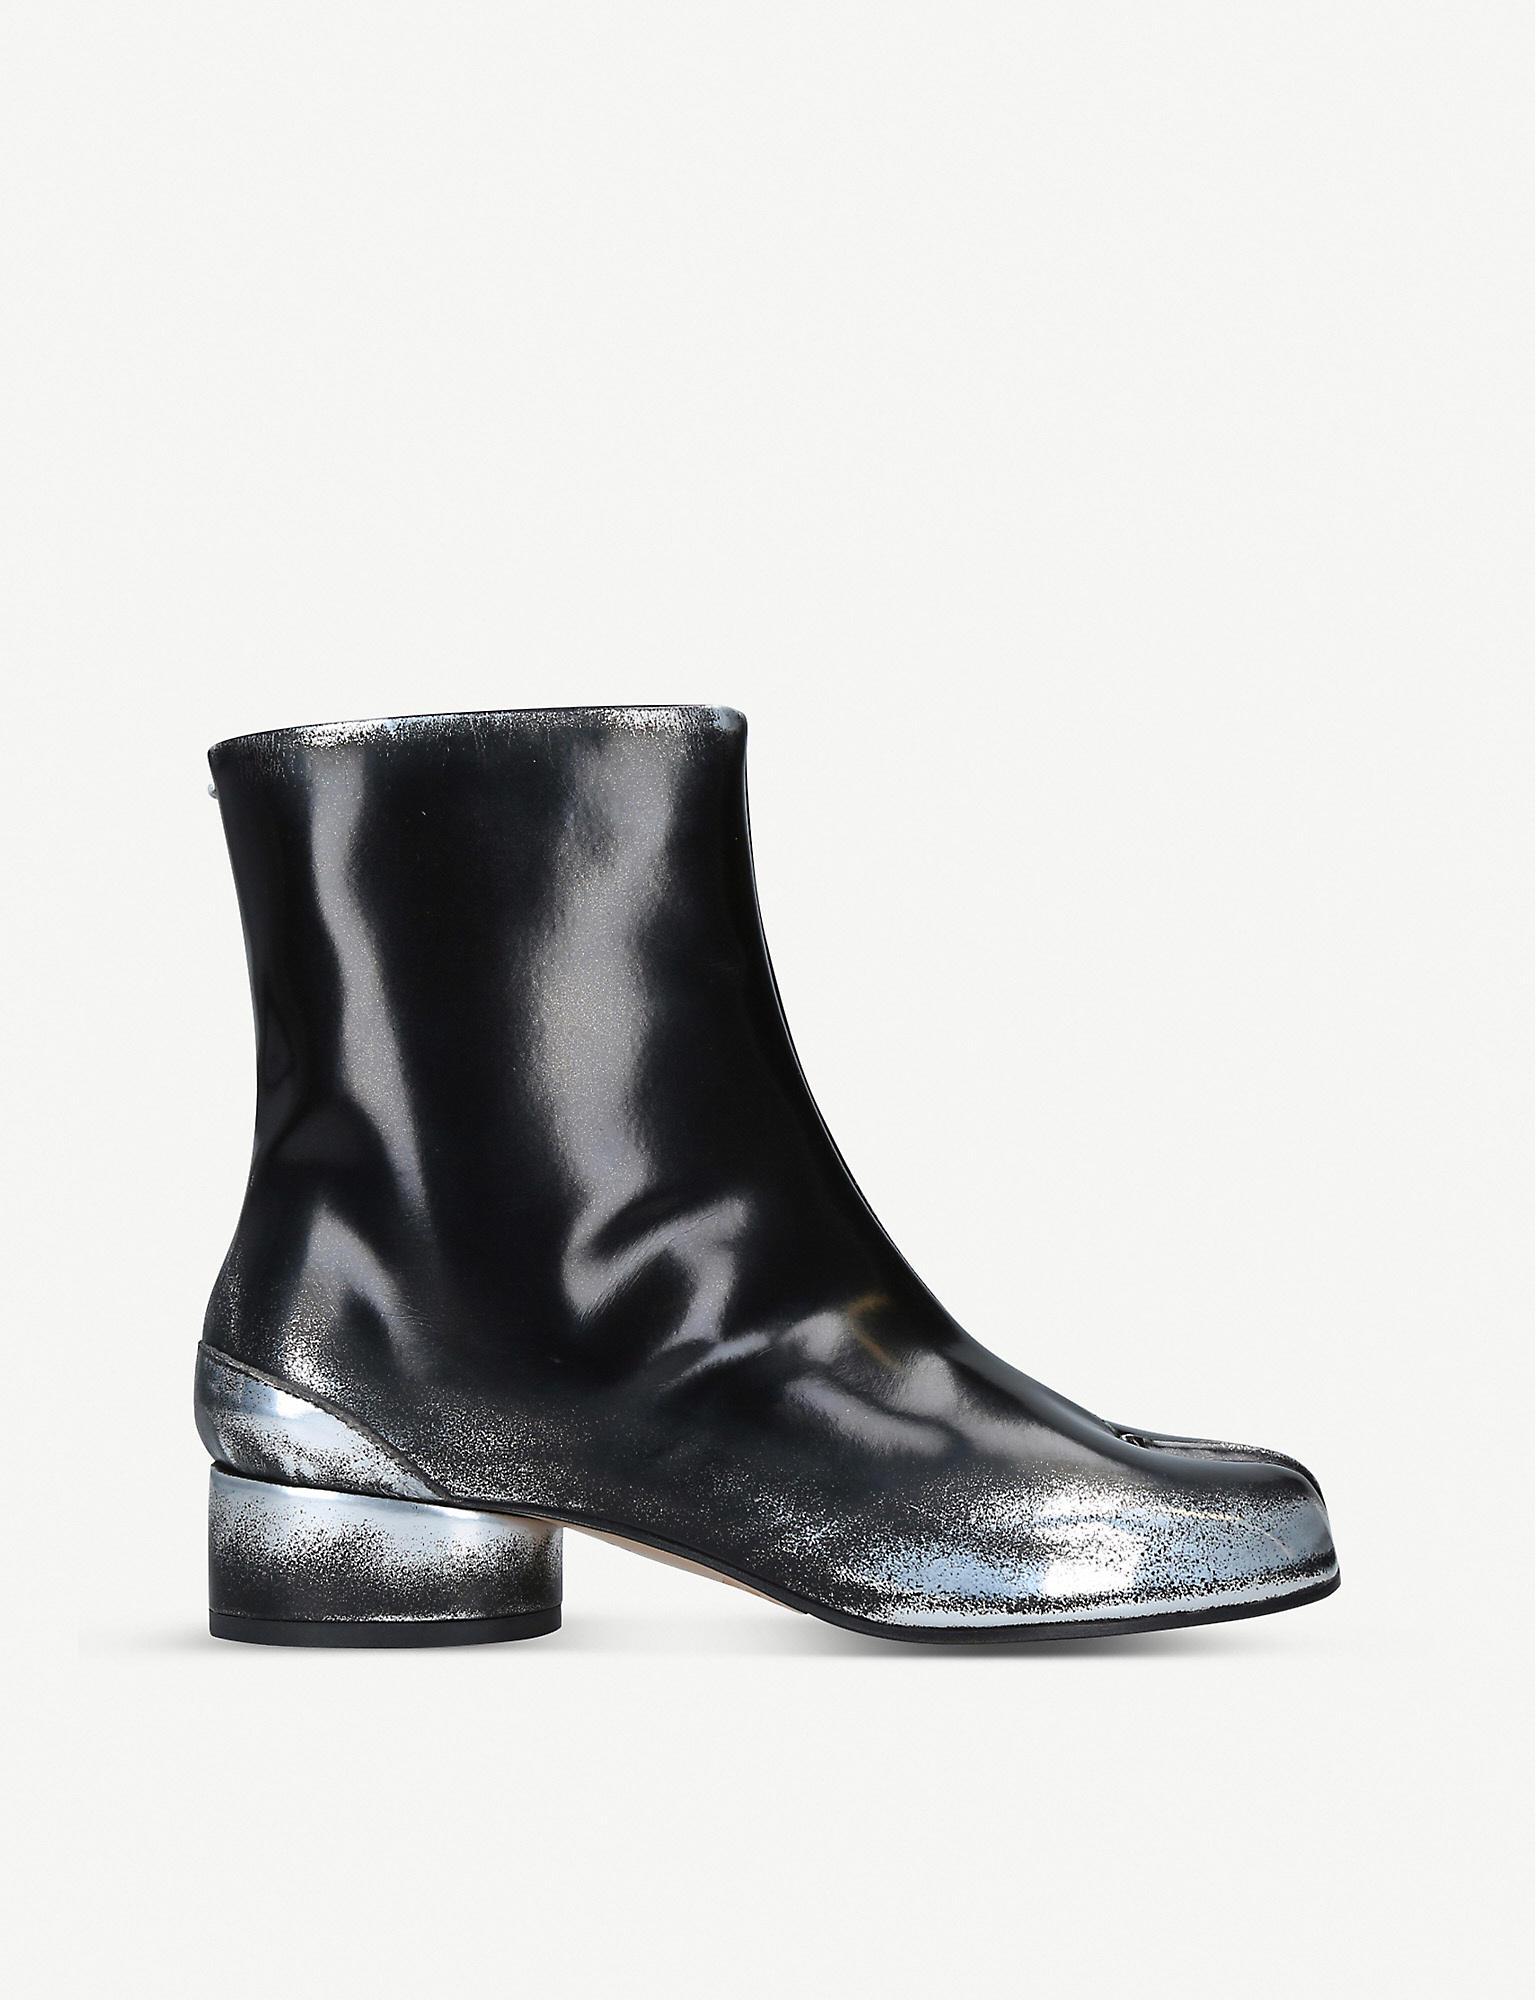 black painted leather boots